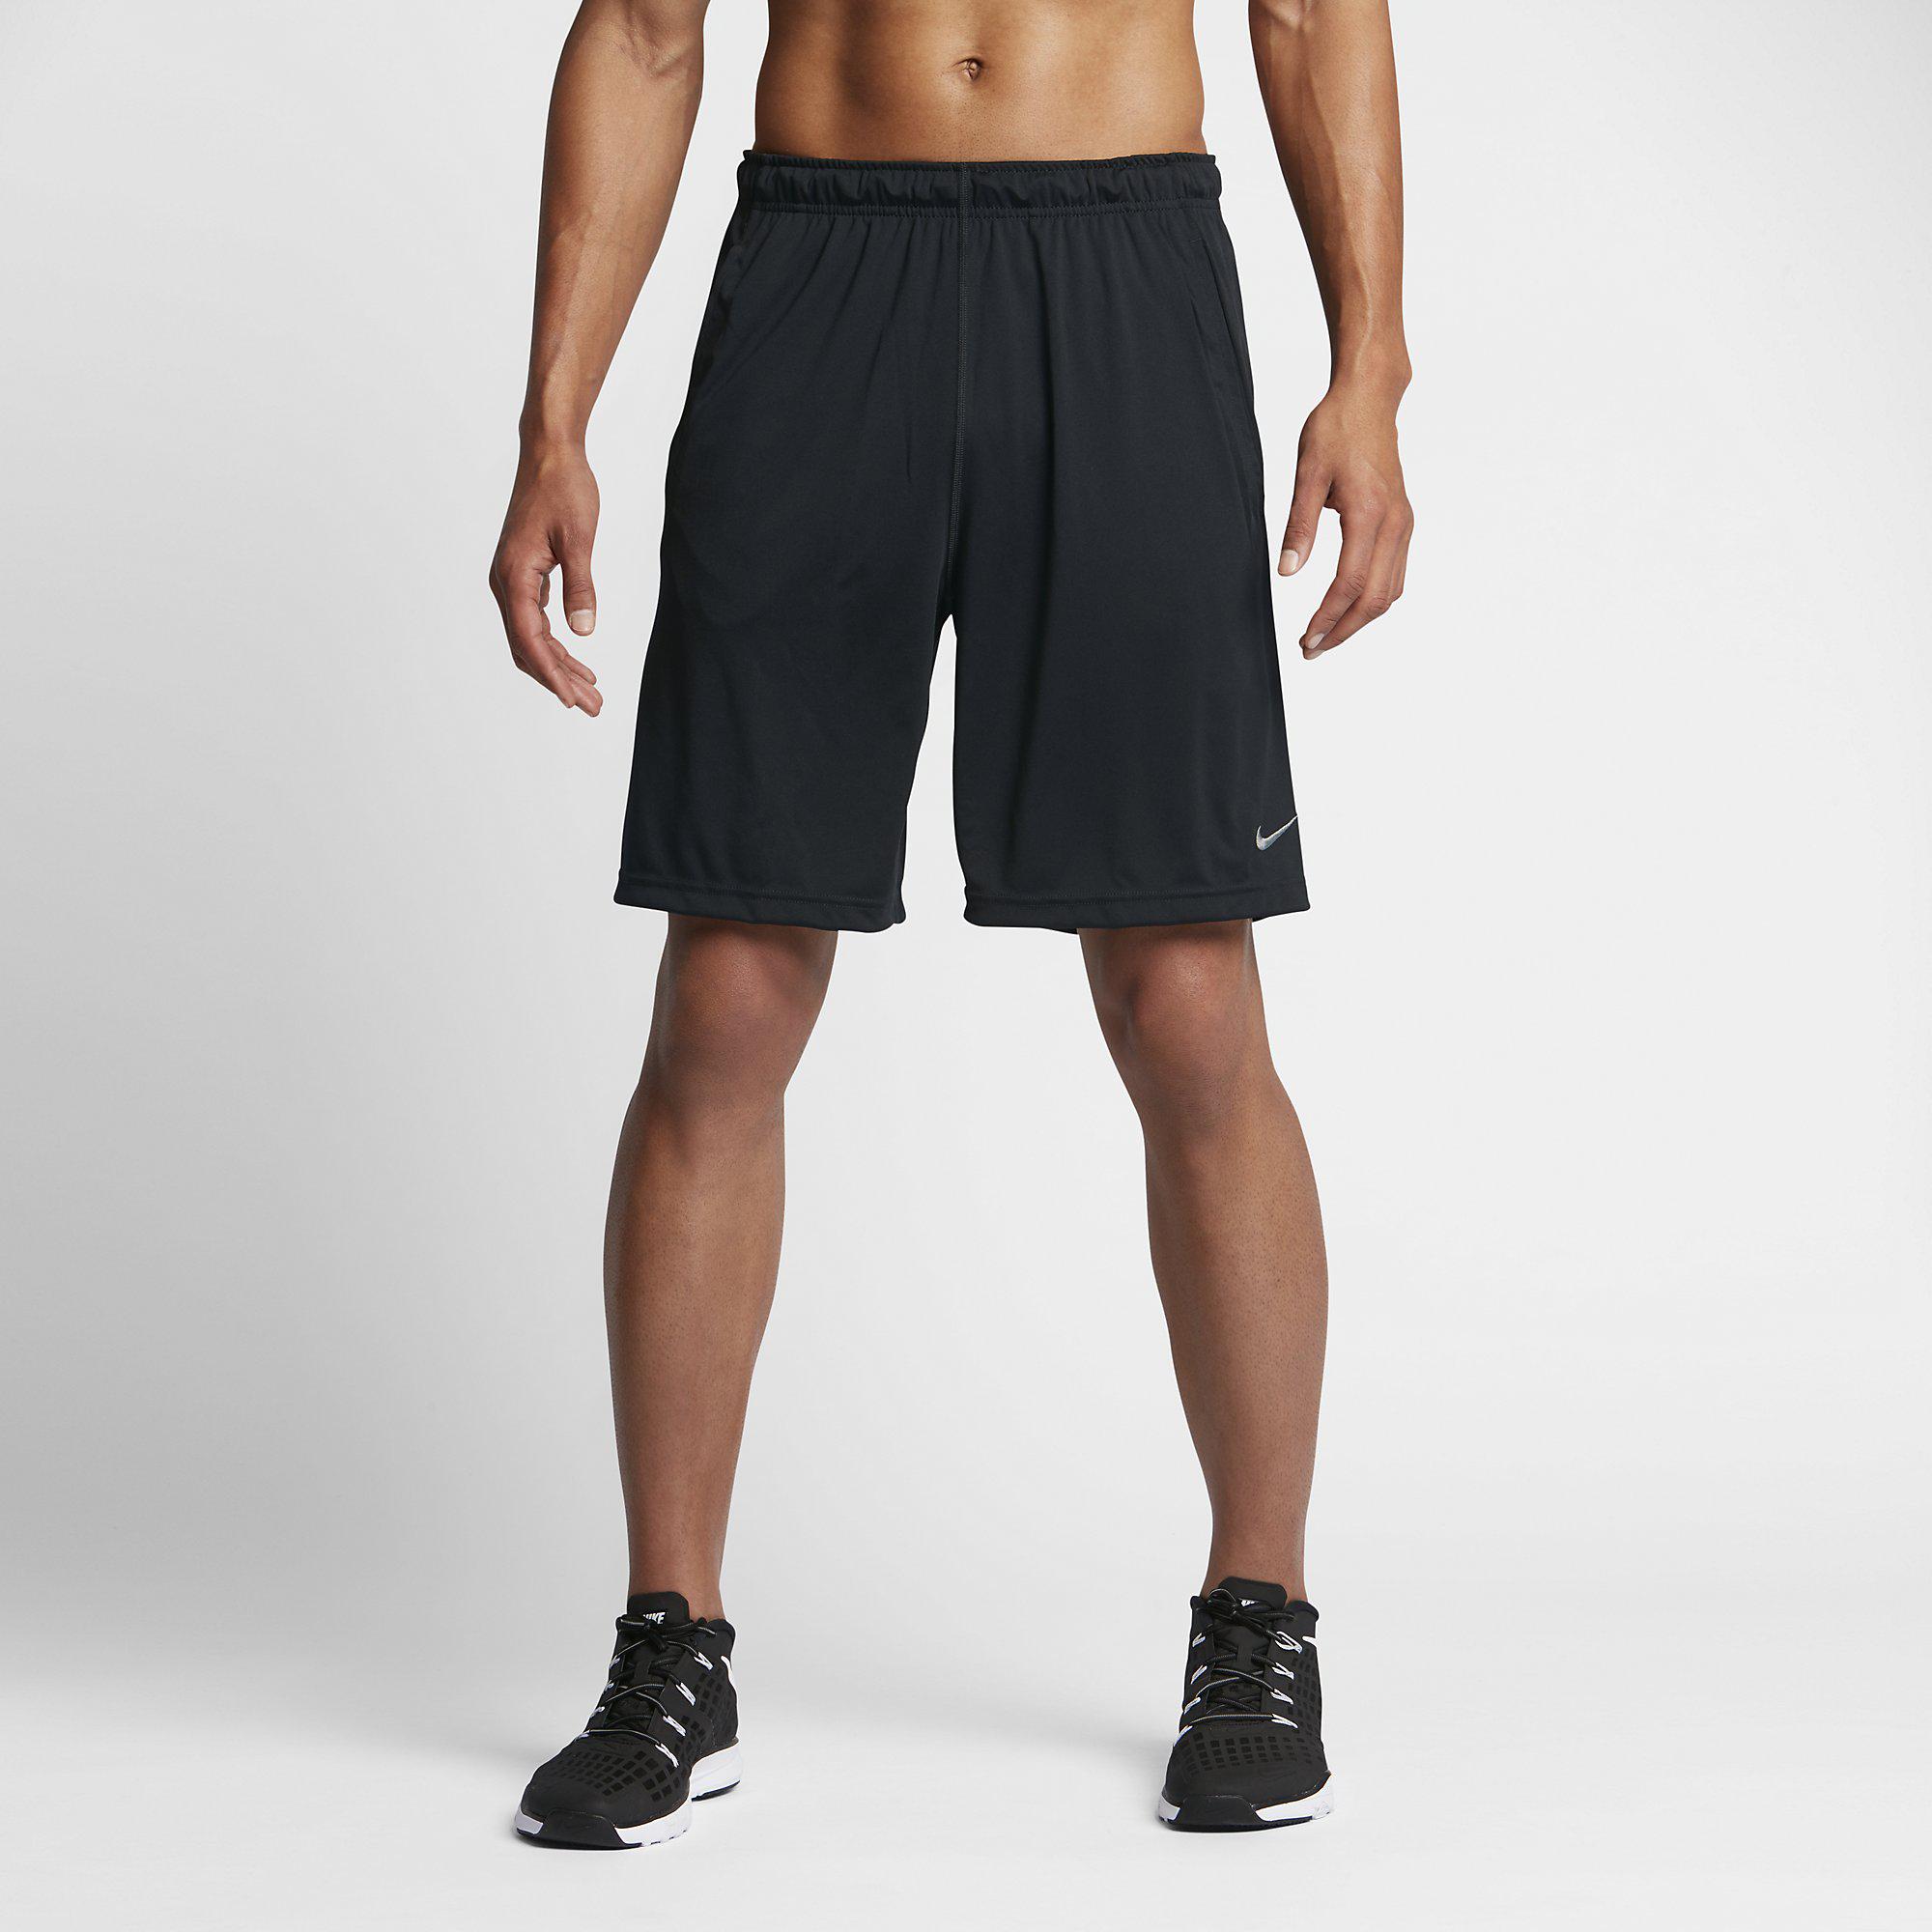 6 Day Workout Black Shorts for push your ABS